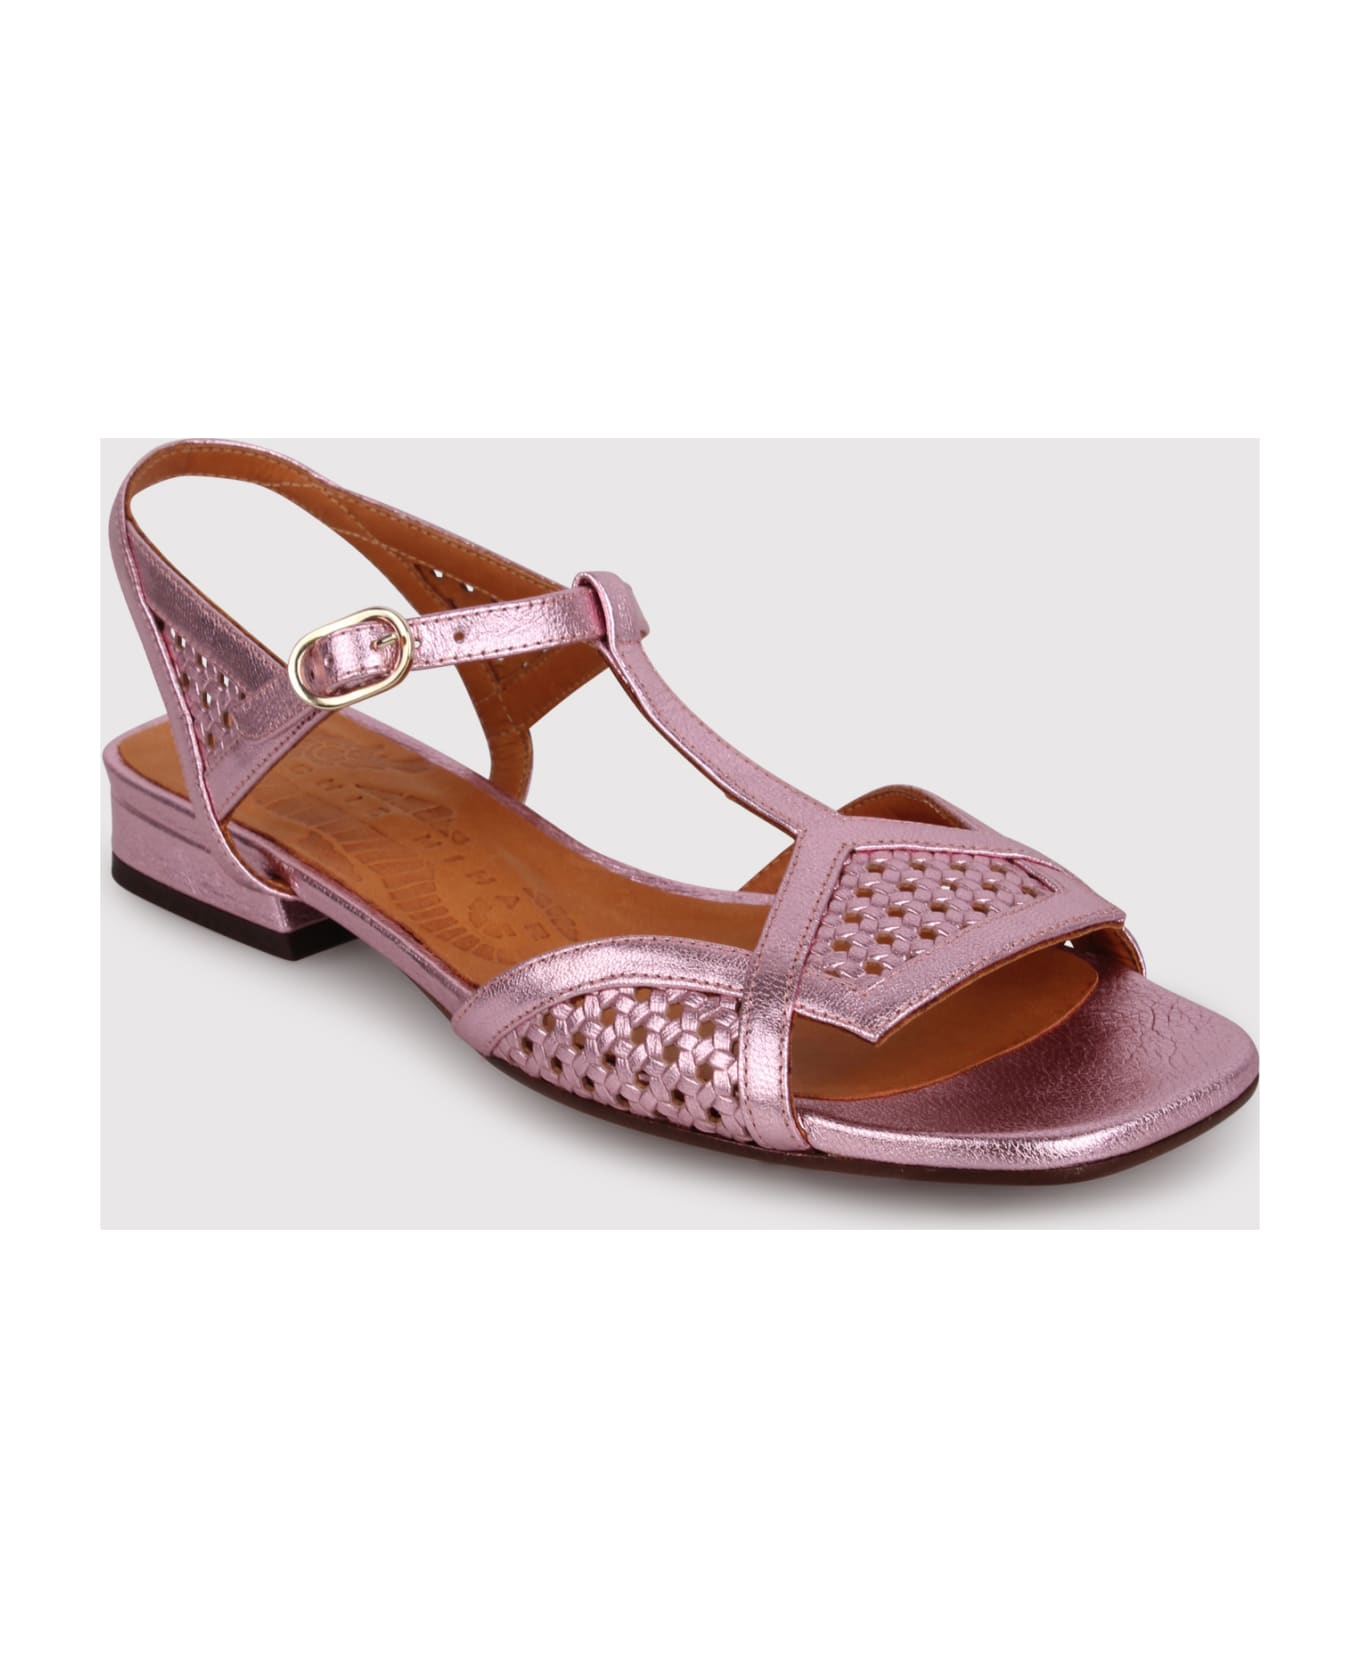 Chie Mihara Tencha Caged Leather Sandals